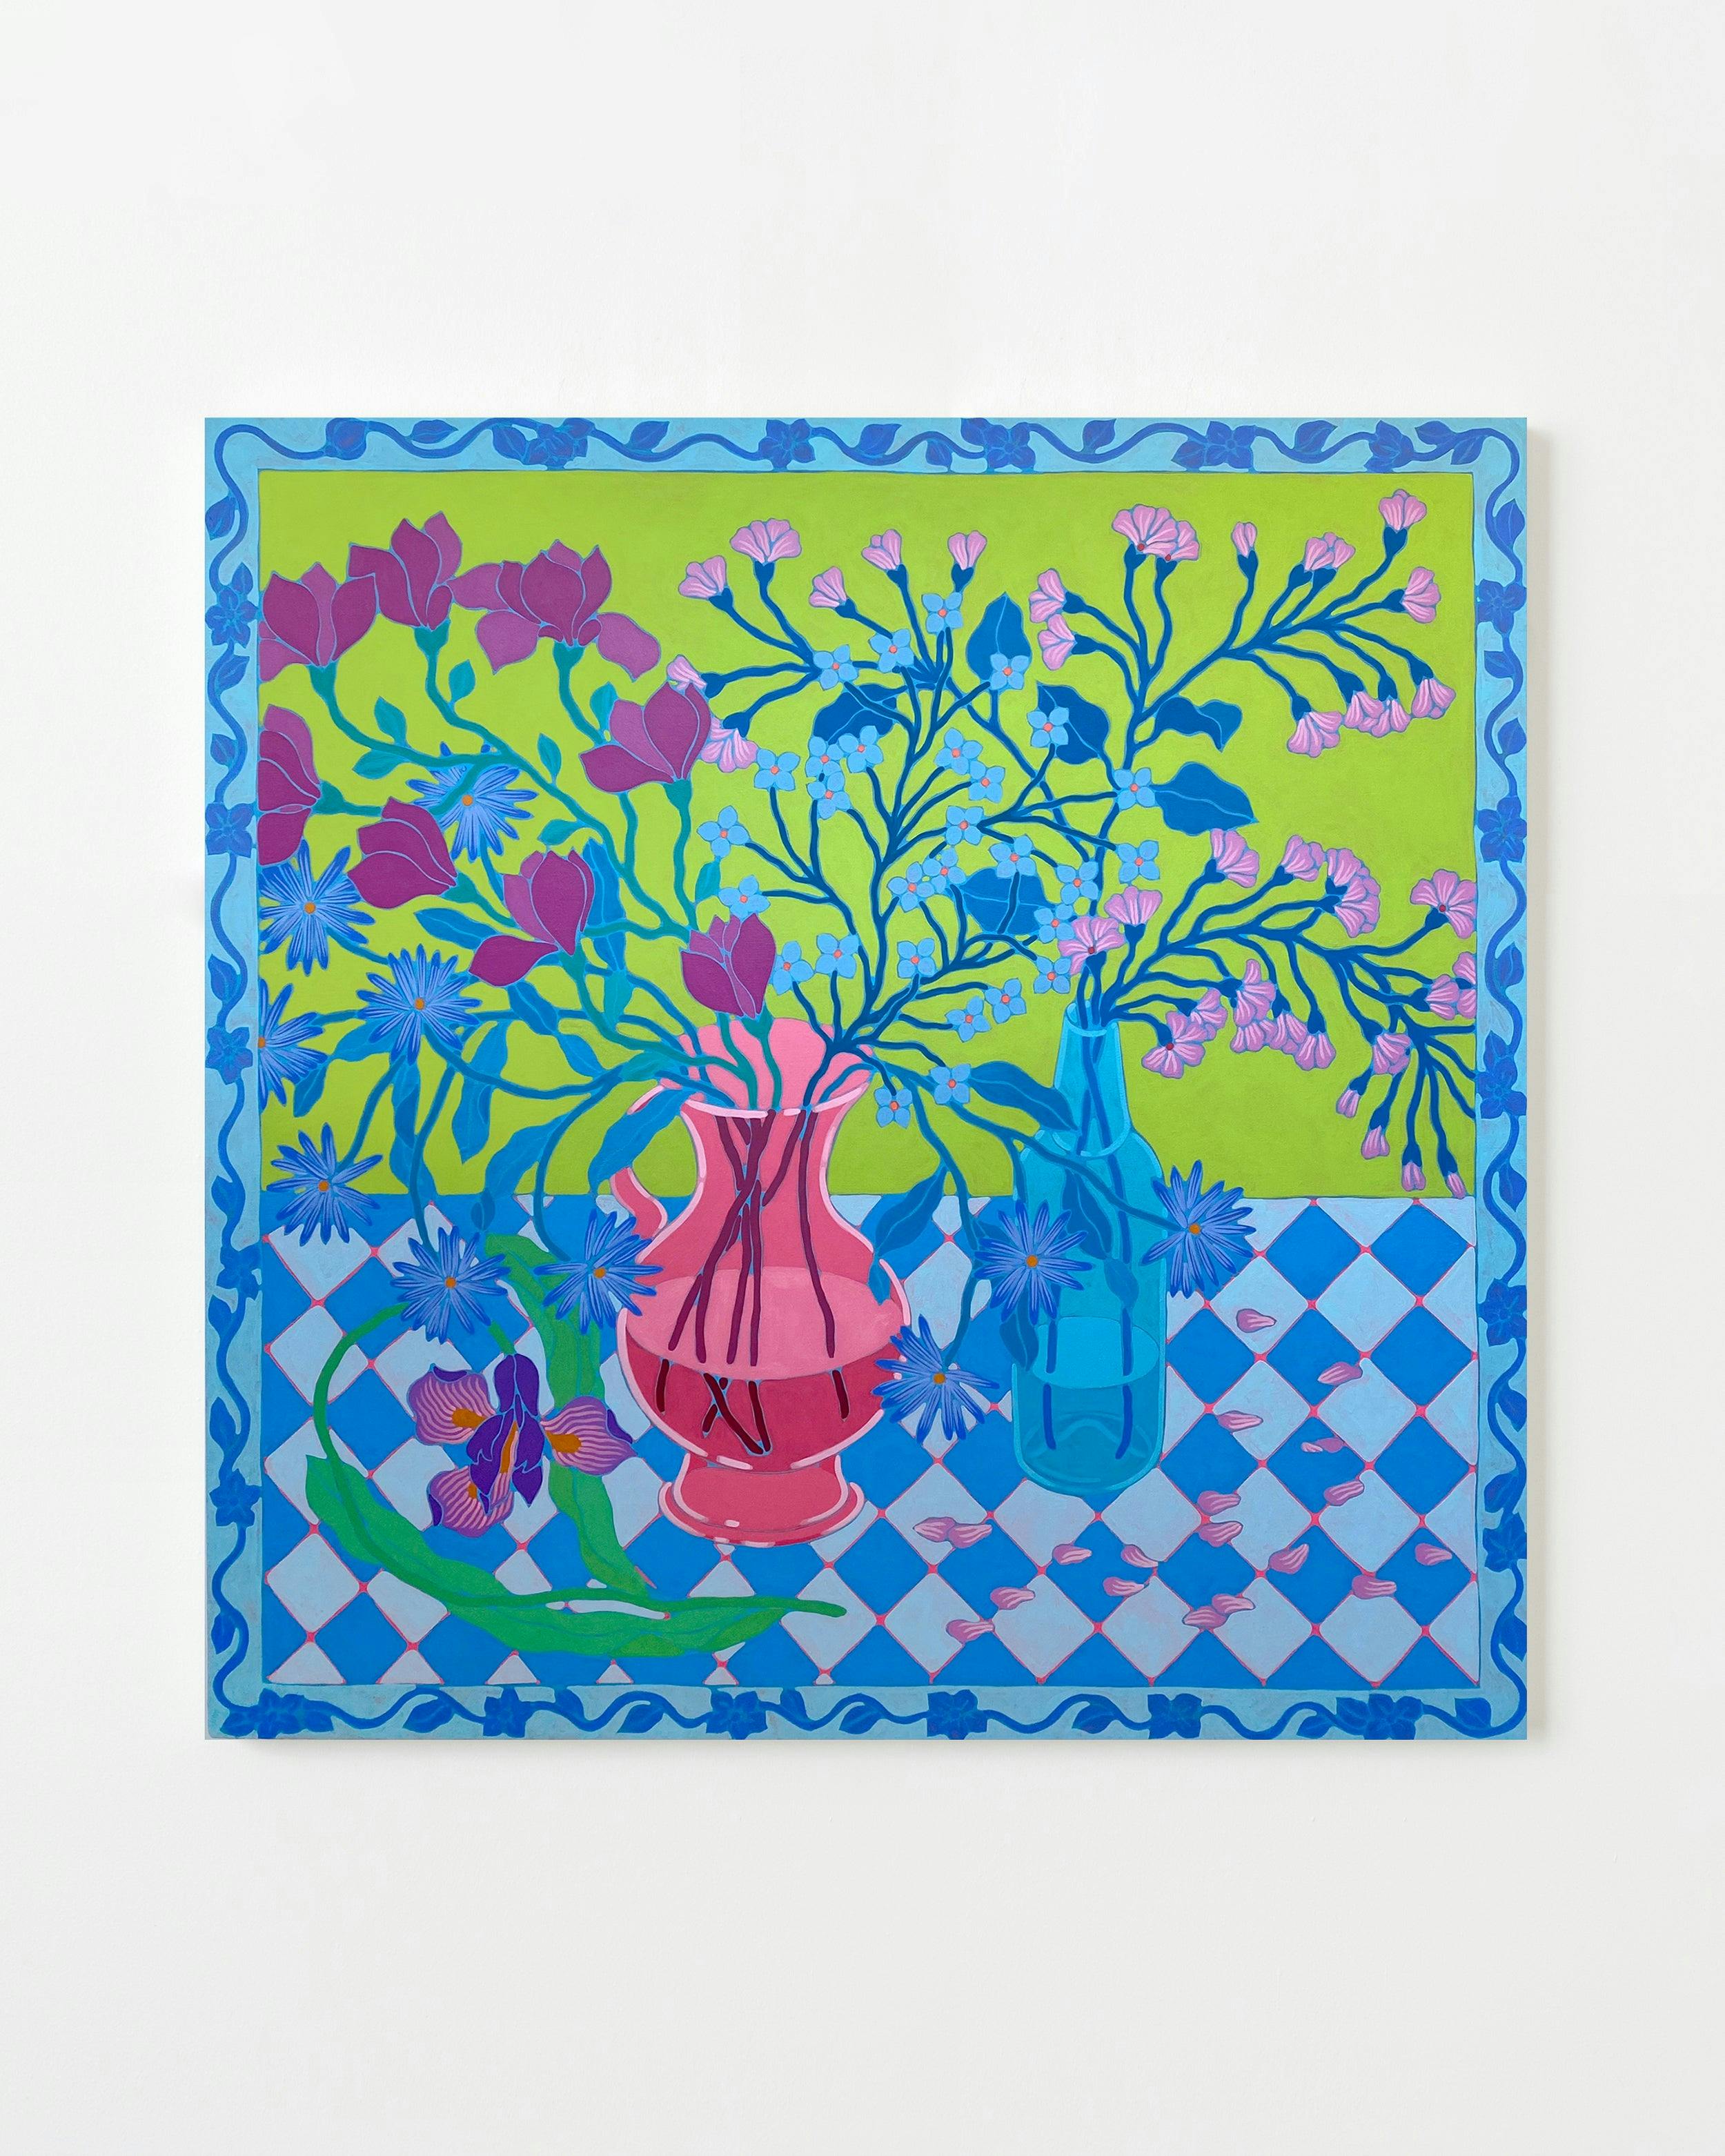 Painting by Sarah Ingraham titled "Spring Flowers on Tile".